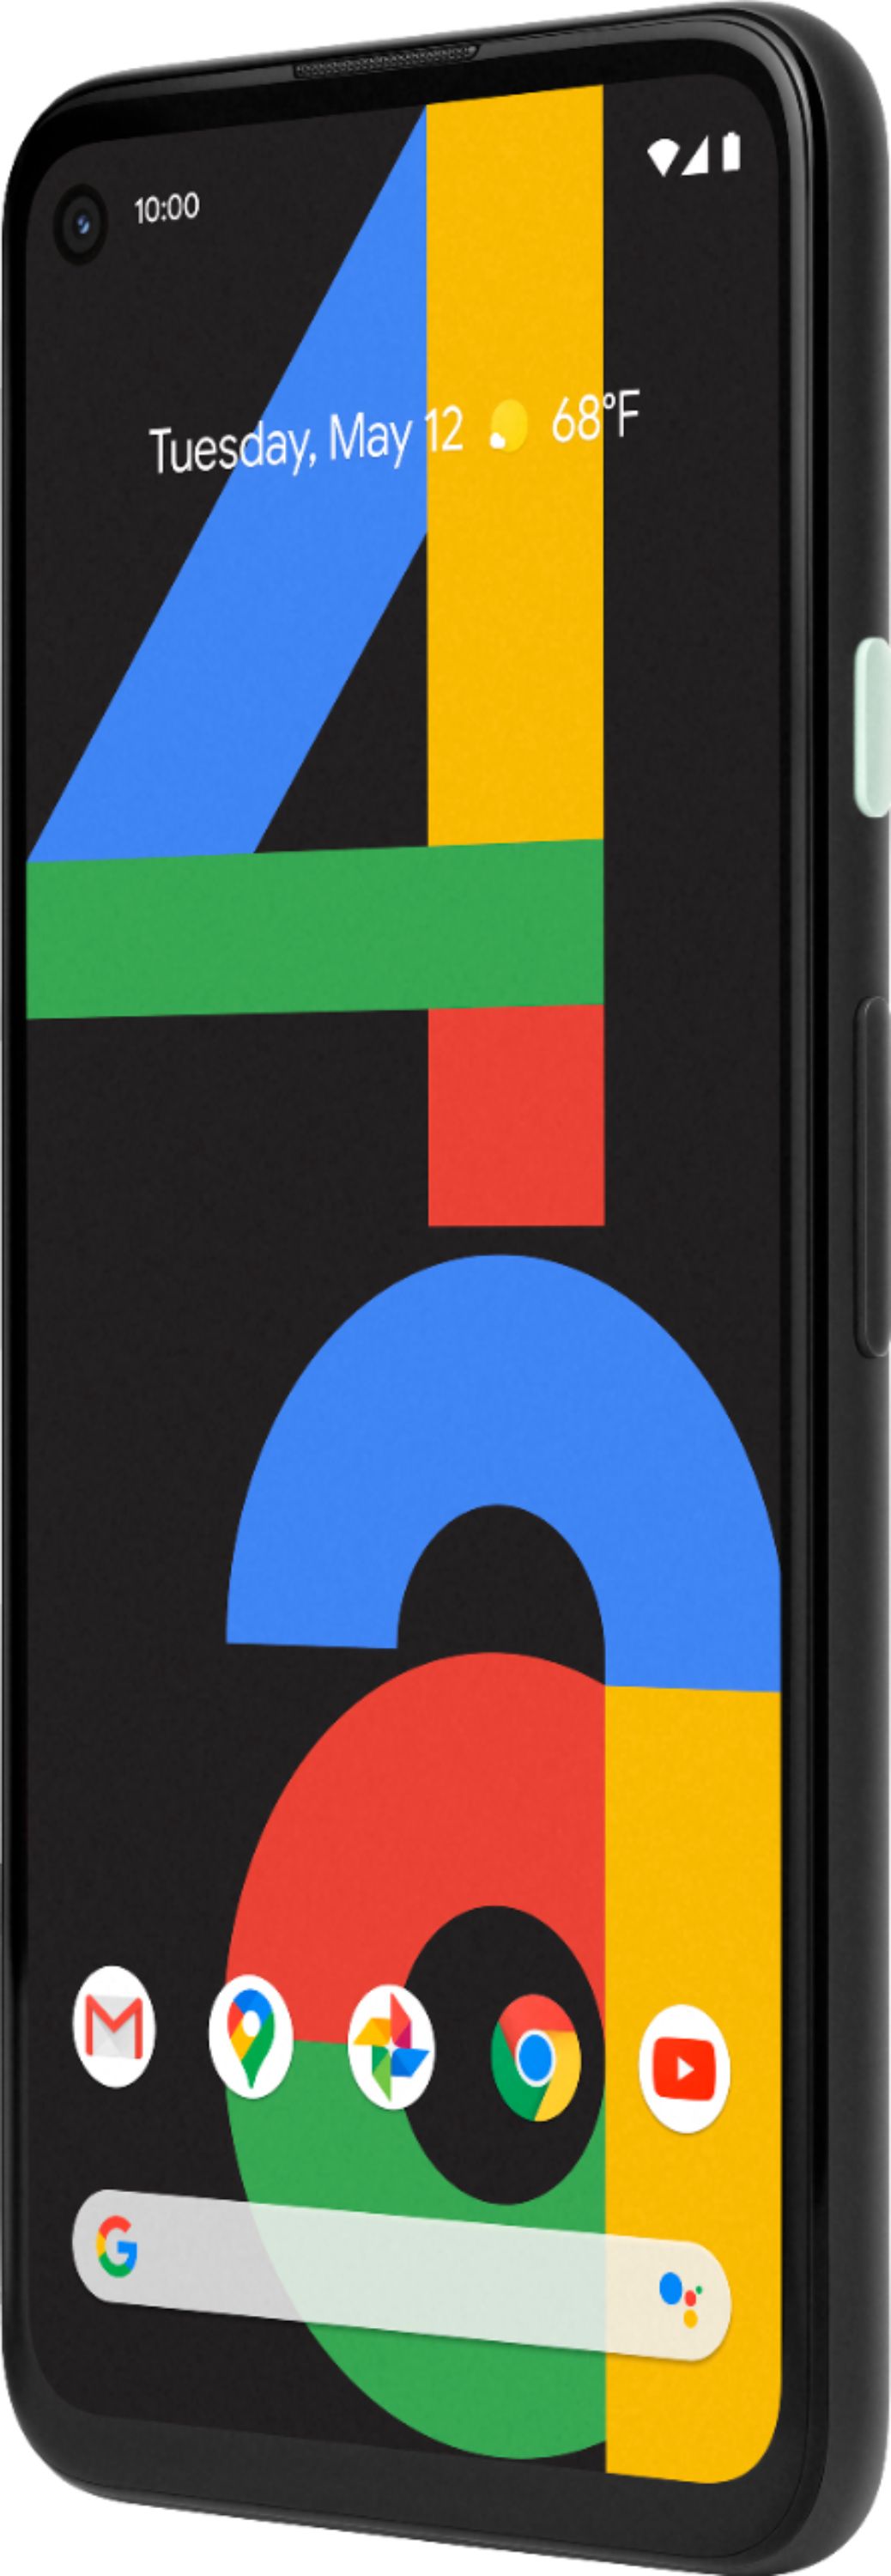 Left View: Google - Geek Squad Certified Refurbished Pixel 4 with 128GB Cell Phone (Unlocked) - Just Black